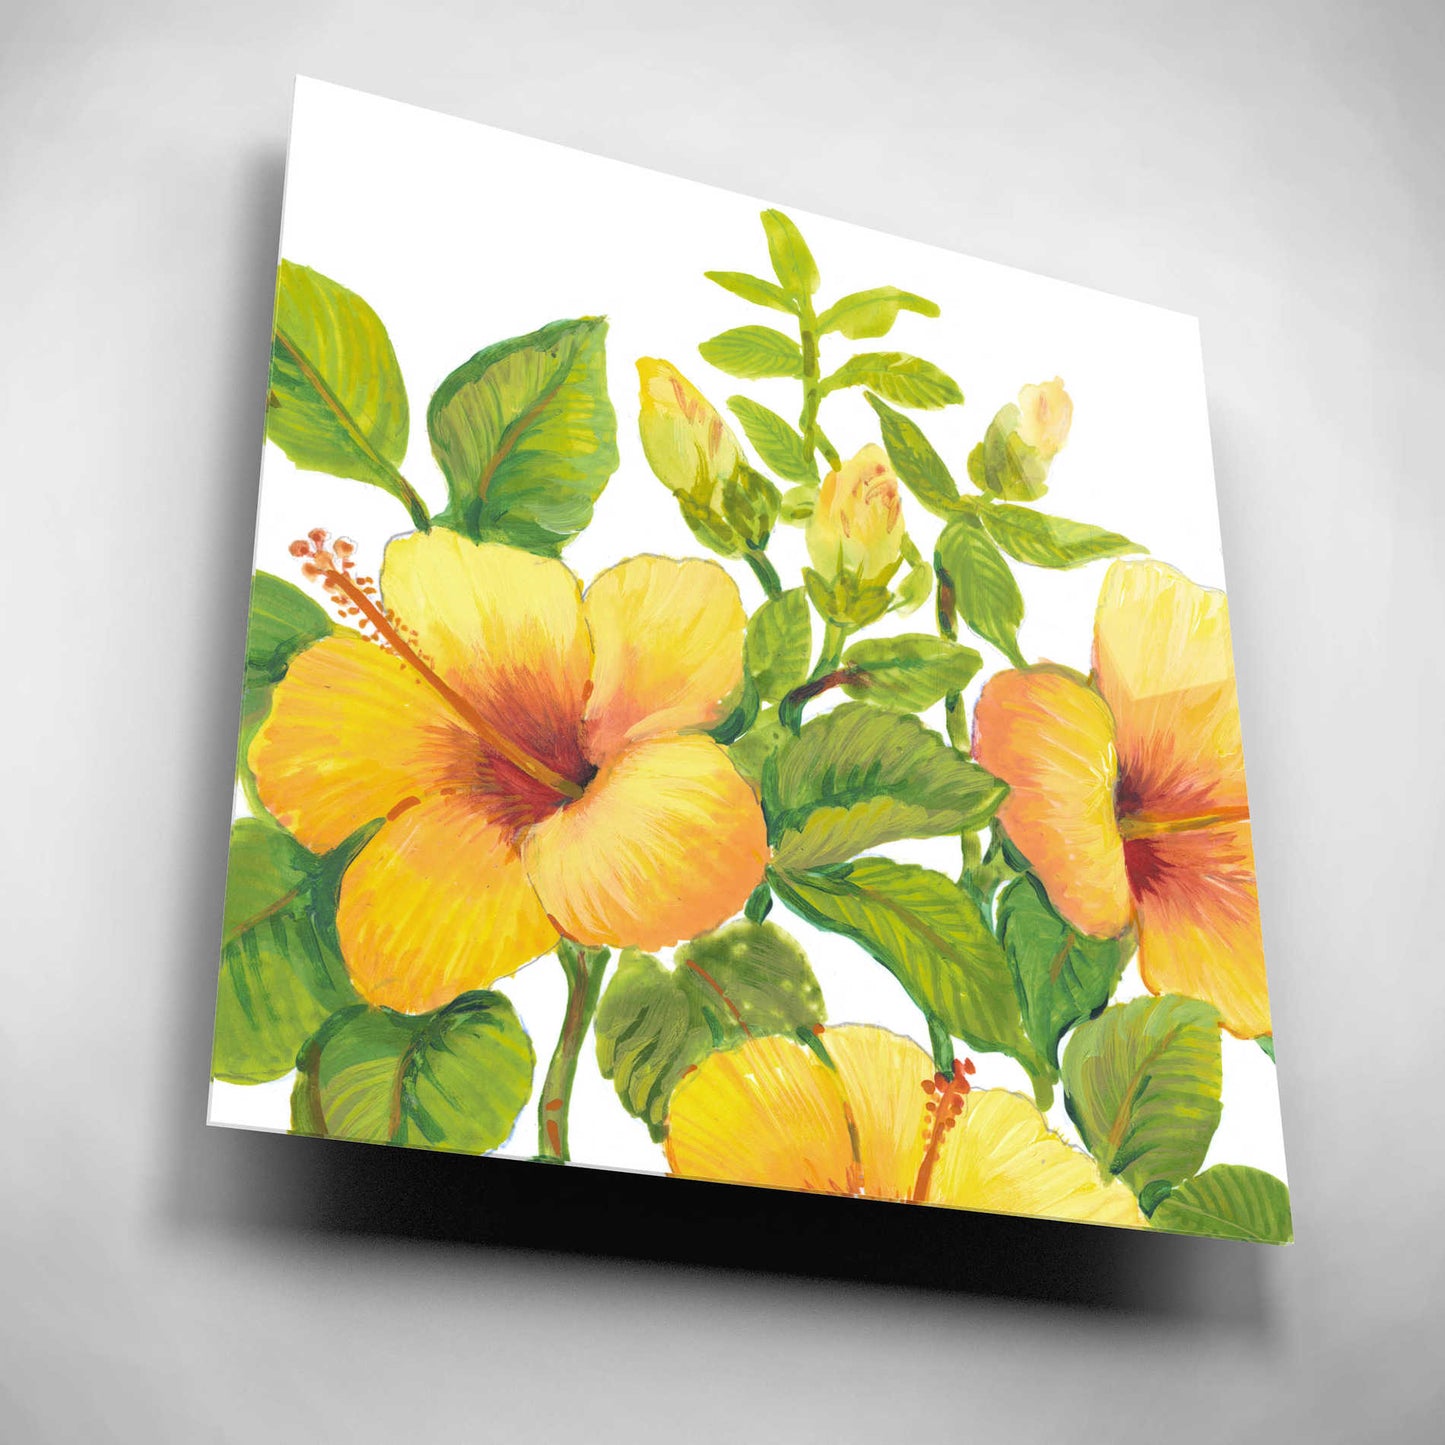 Epic Art 'Watercolor Hibiscus I' by Tim O'Toole, Acrylic Glass Wall Art,12x12